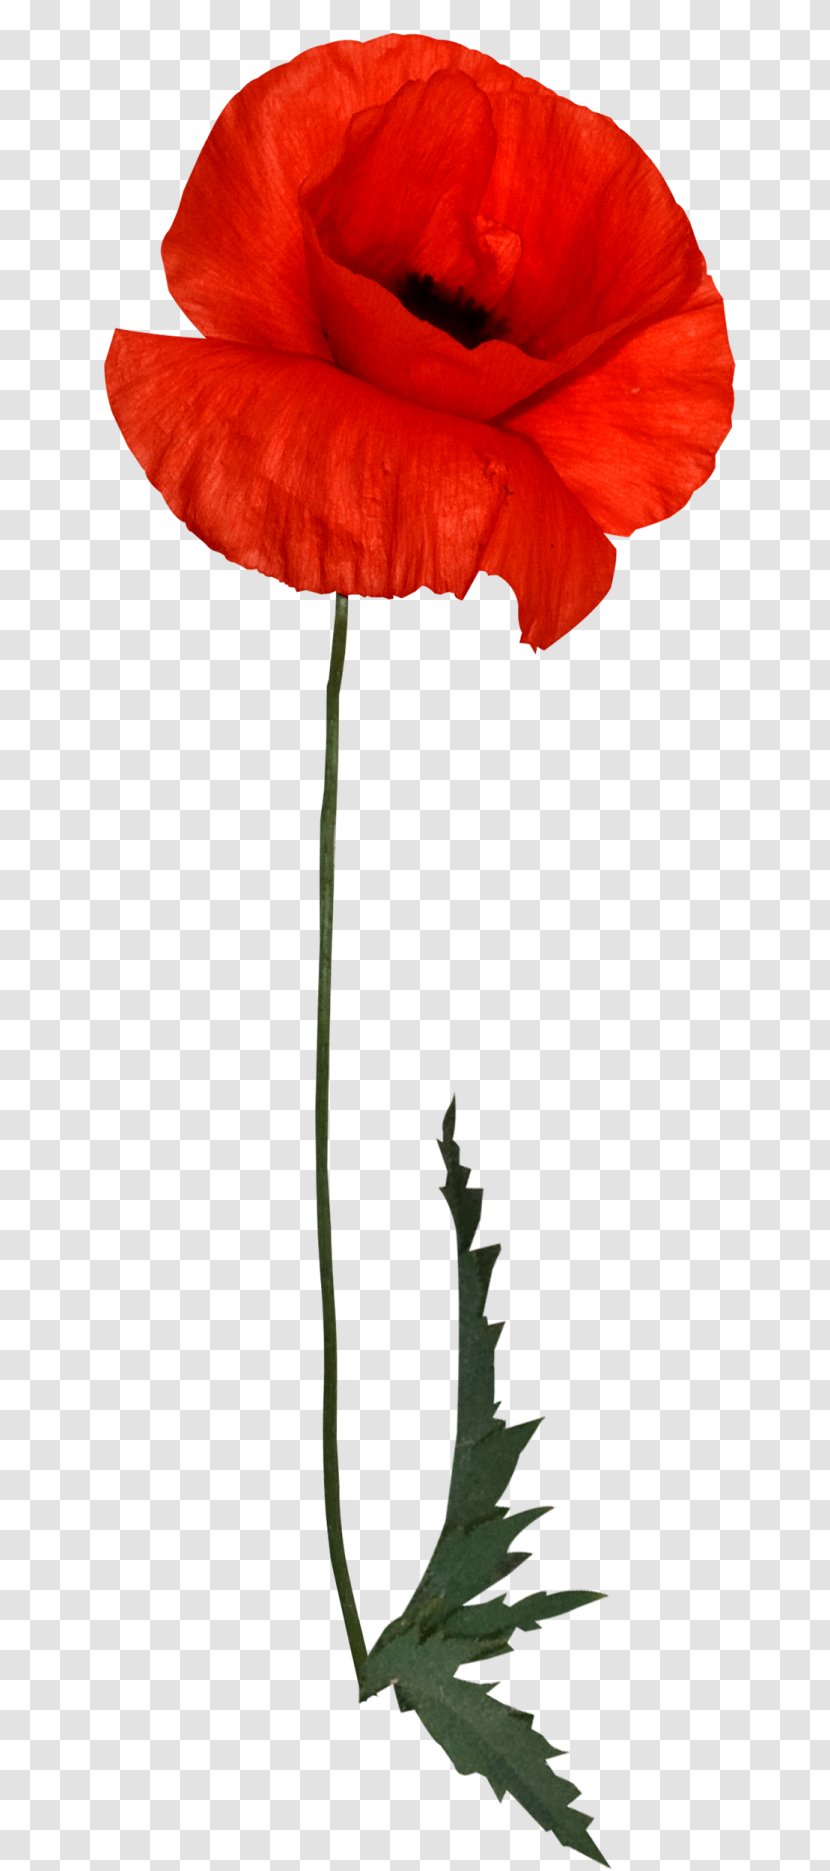 Flower Red Poppy - Common Transparent PNG